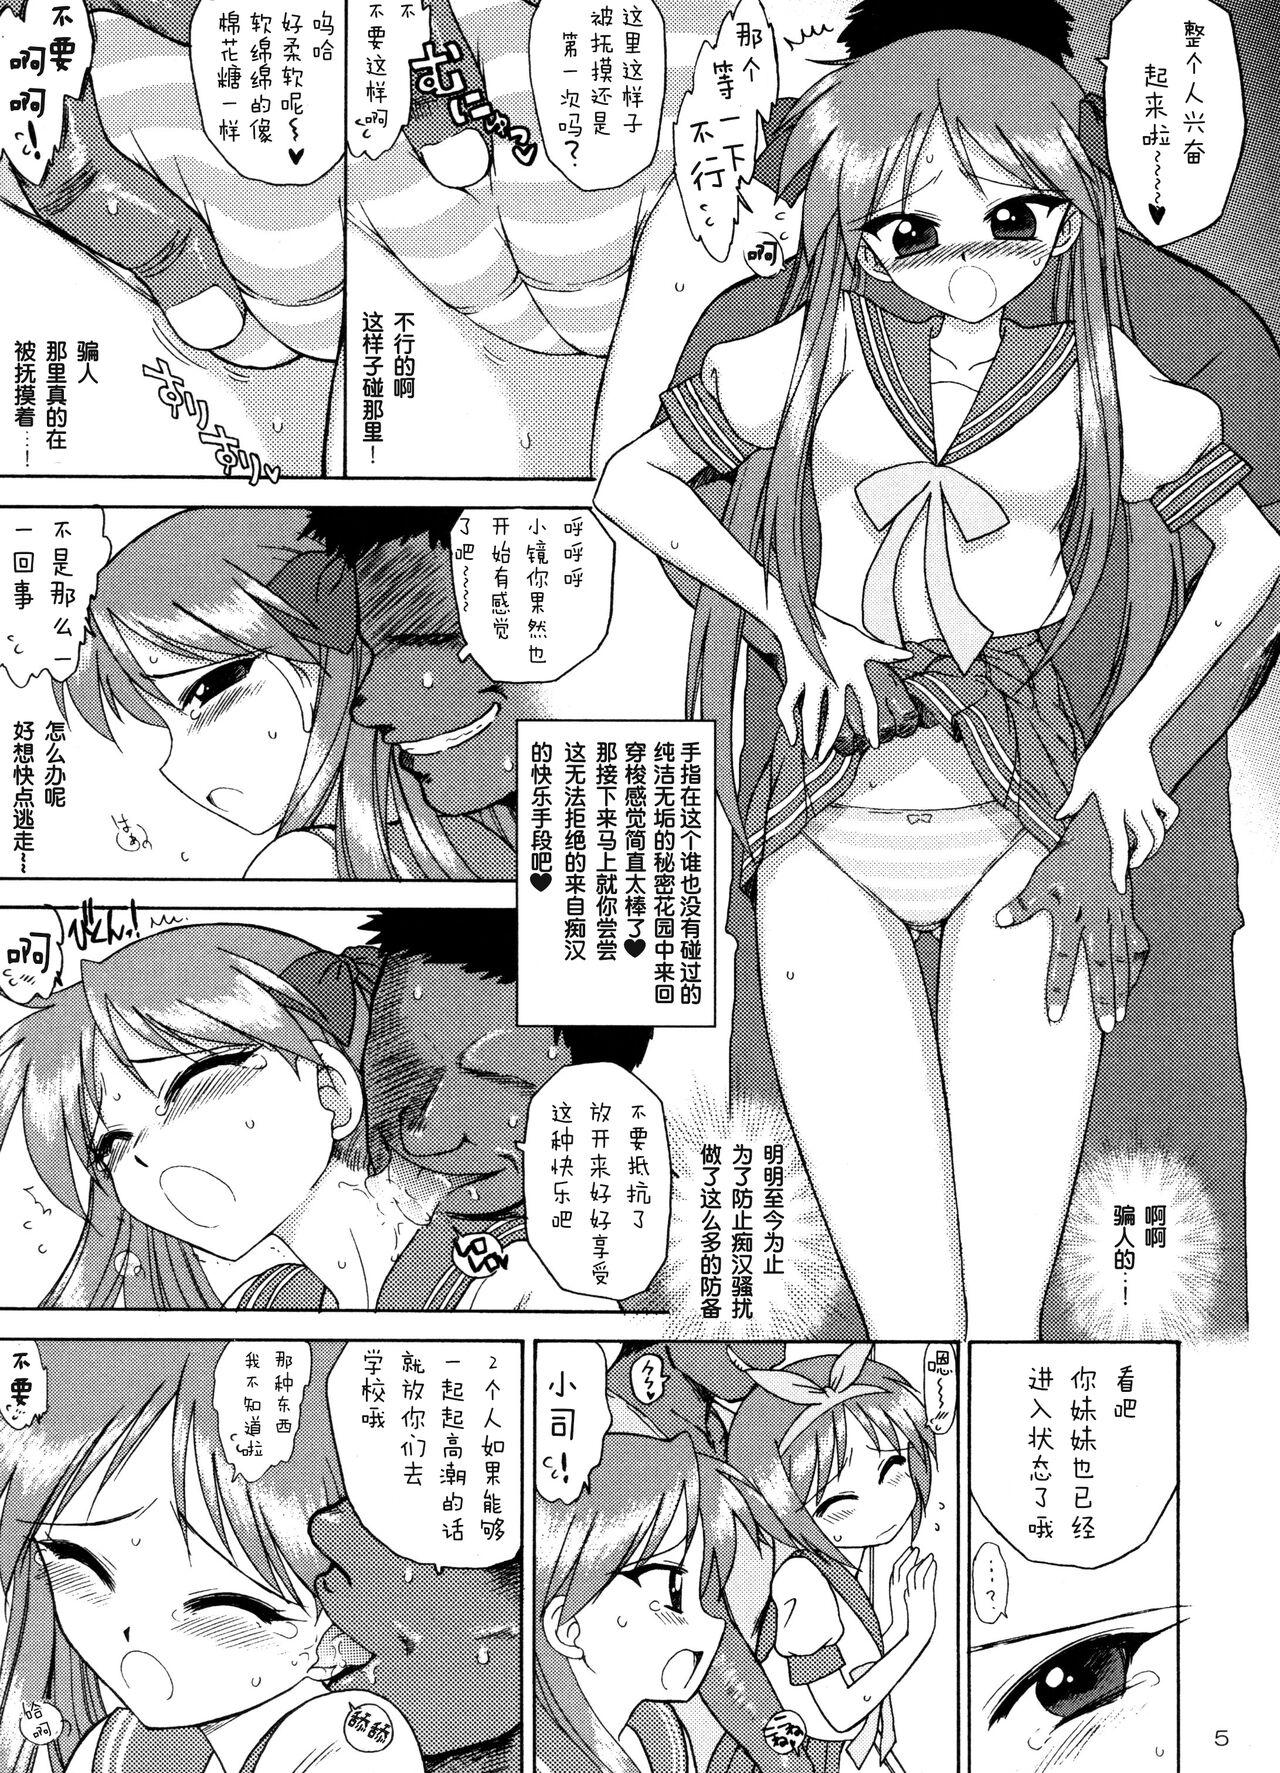 Hardcore Fucking Man in the Mirror - Lucky star 8teen - Page 4